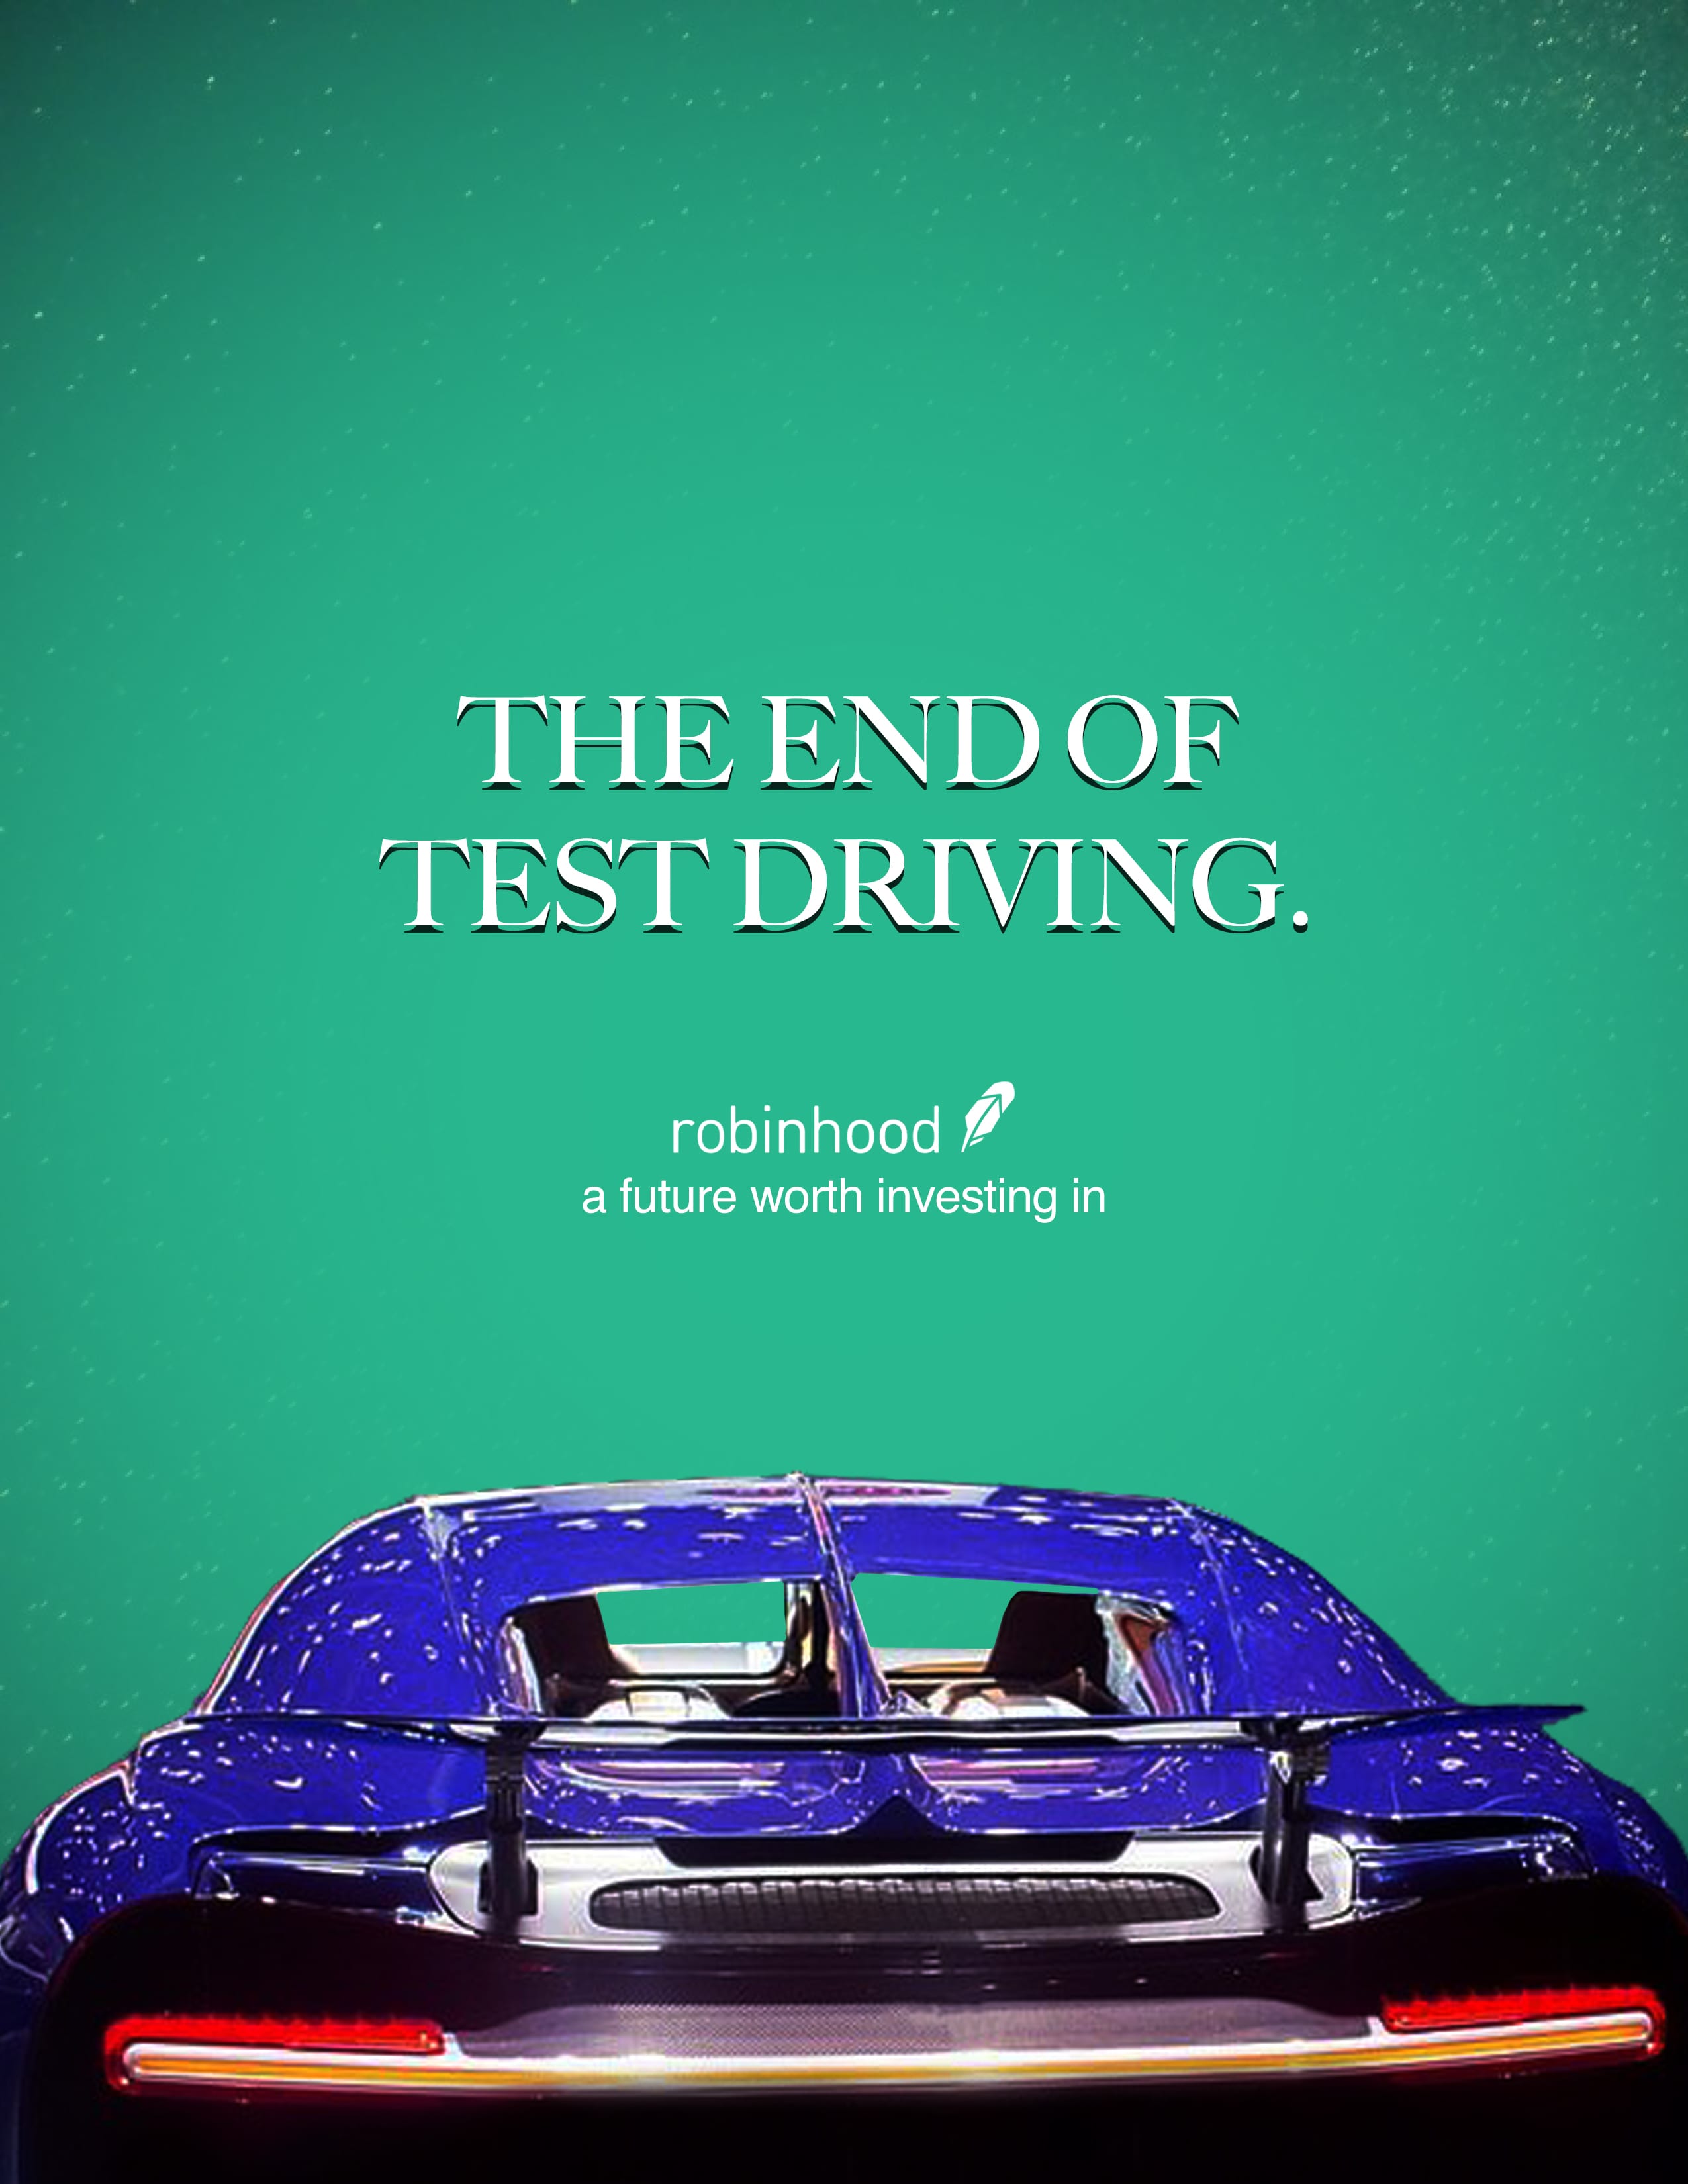 The end of test driving